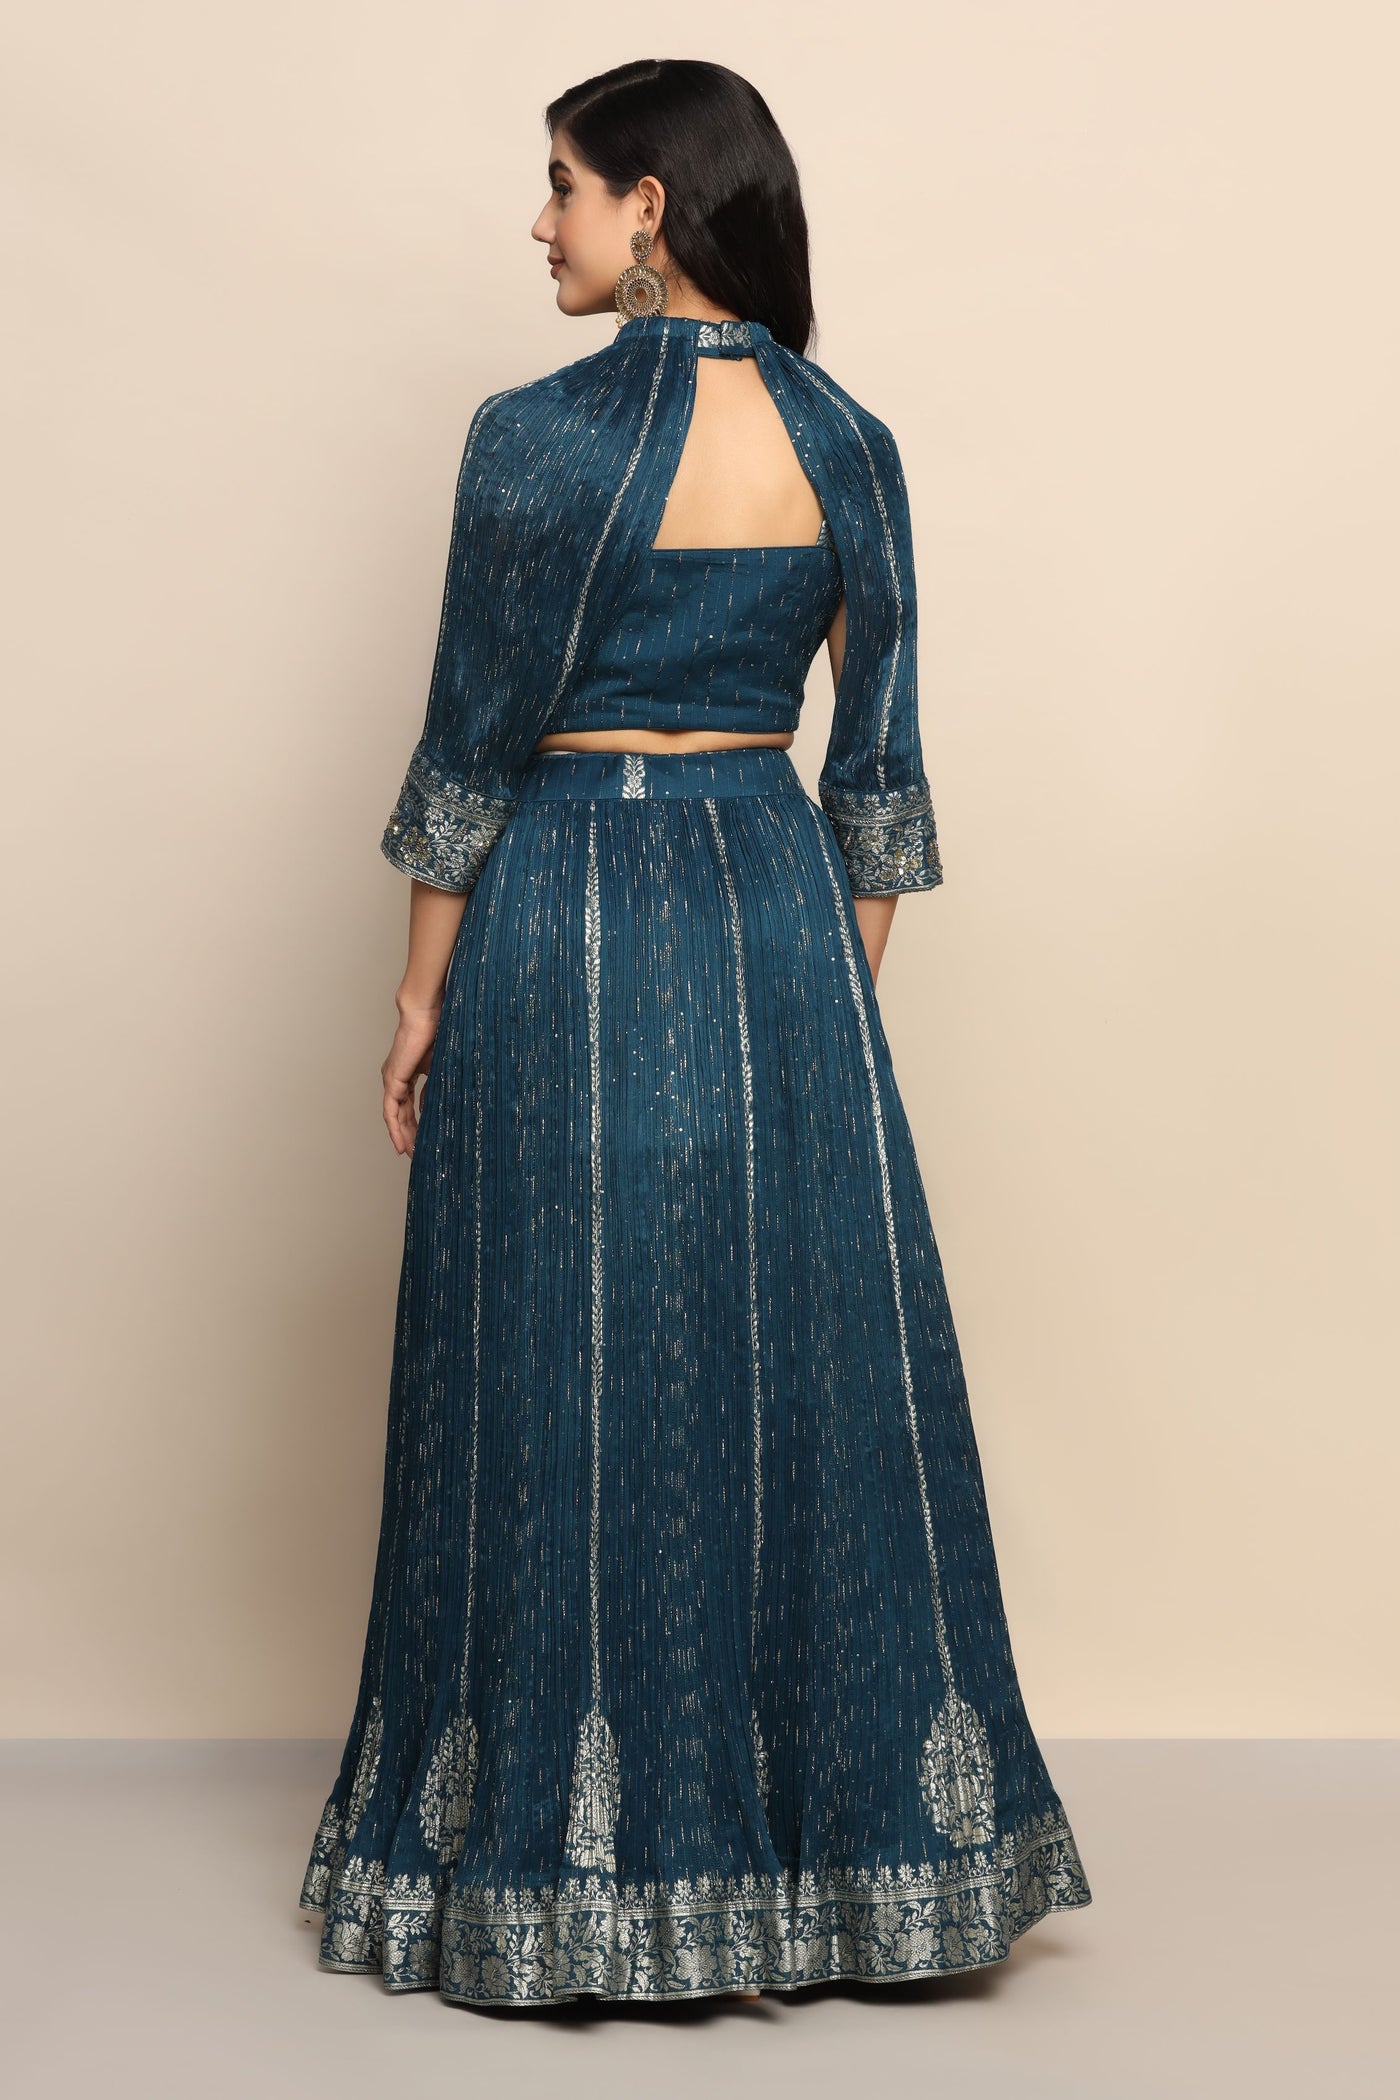 Captivating Royal Blue Sequin Dress with Thread Work and Cut Dana Embellishments